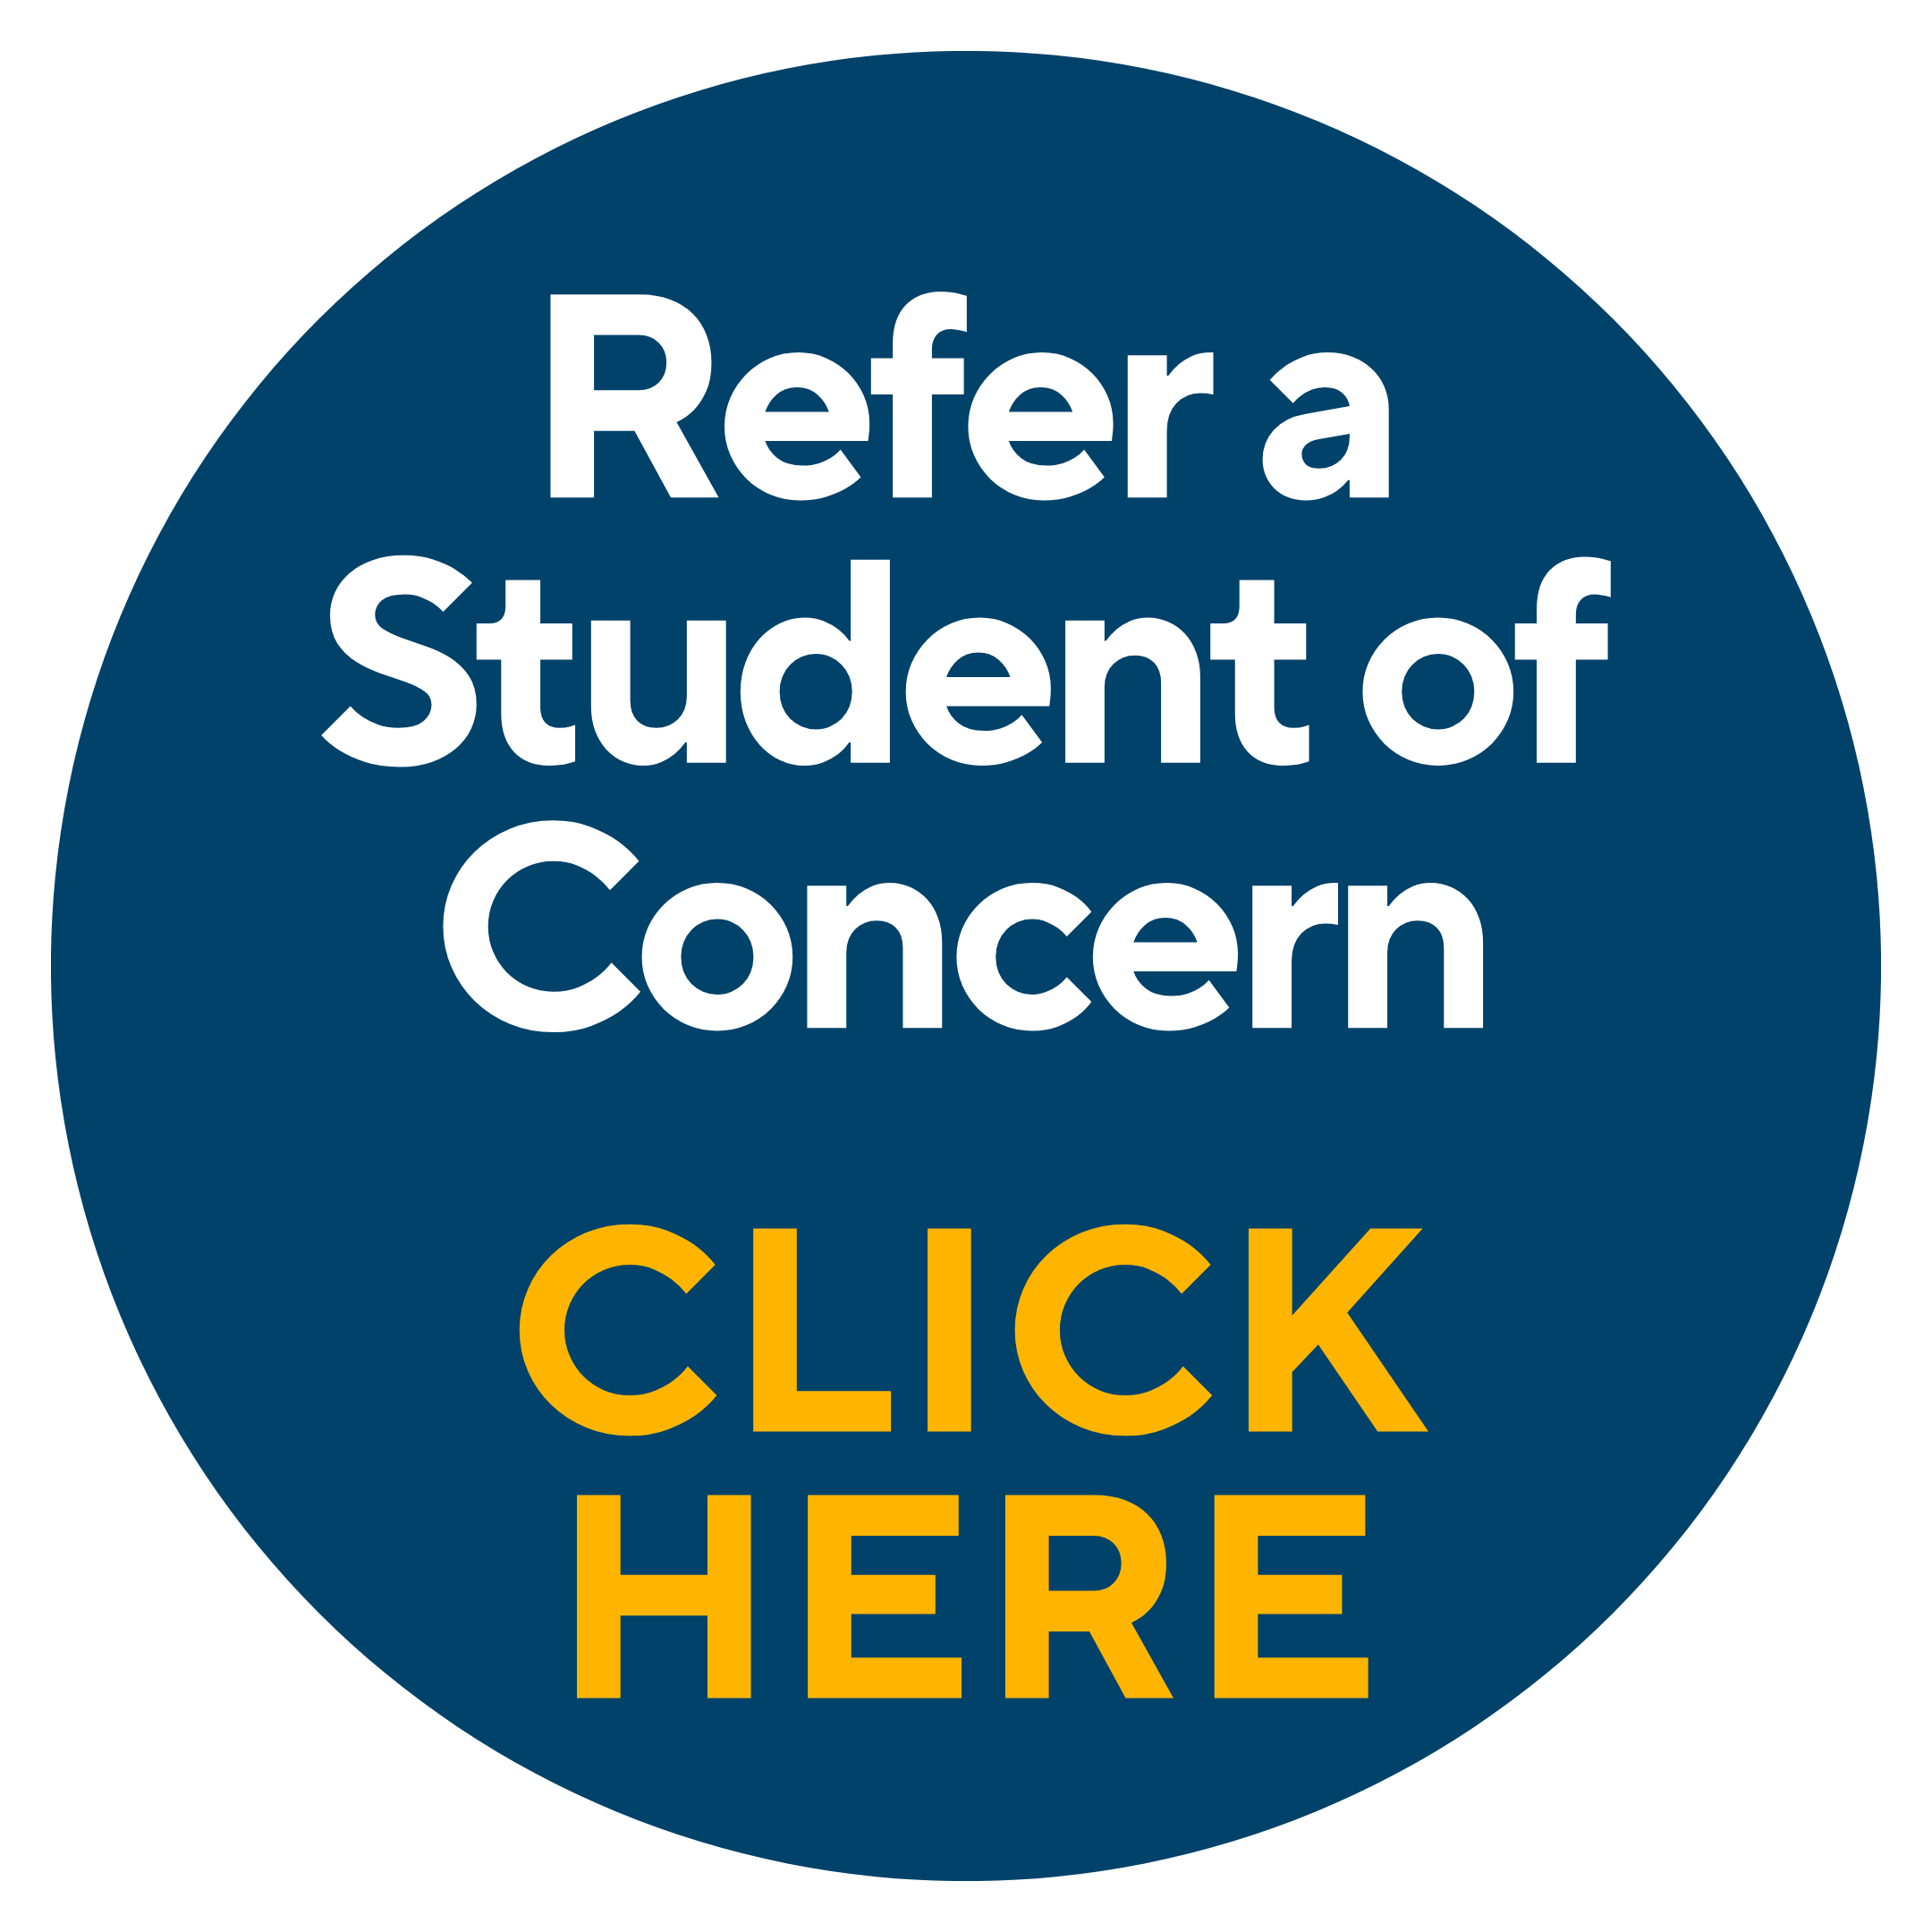 Refer a student of concern now - click here